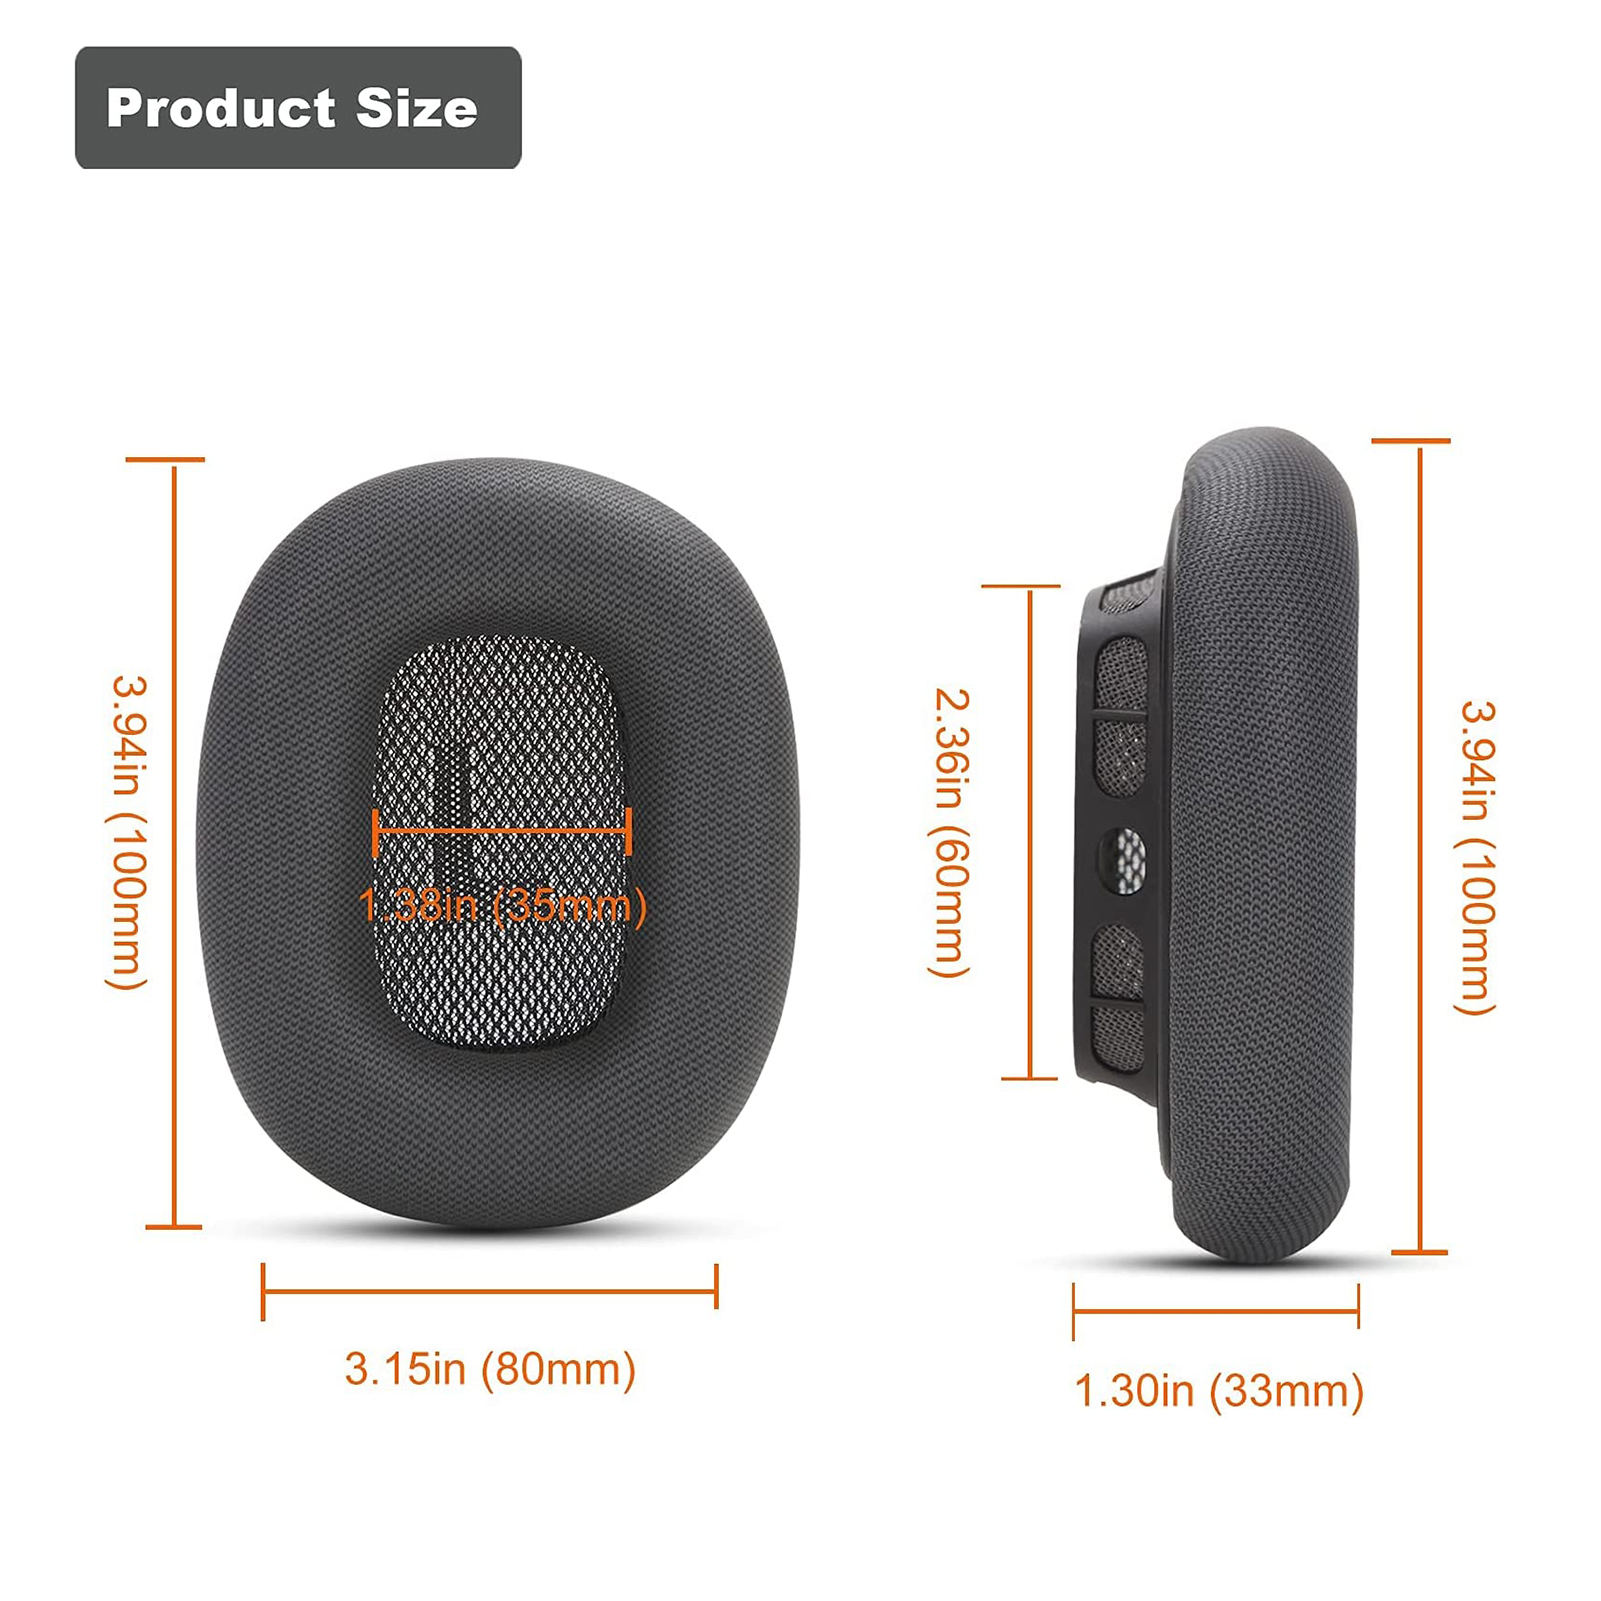 Mesh Fabric Earpads Replacement Headphones Cushion Easy to Install Compatible with Apple/AirPods Max